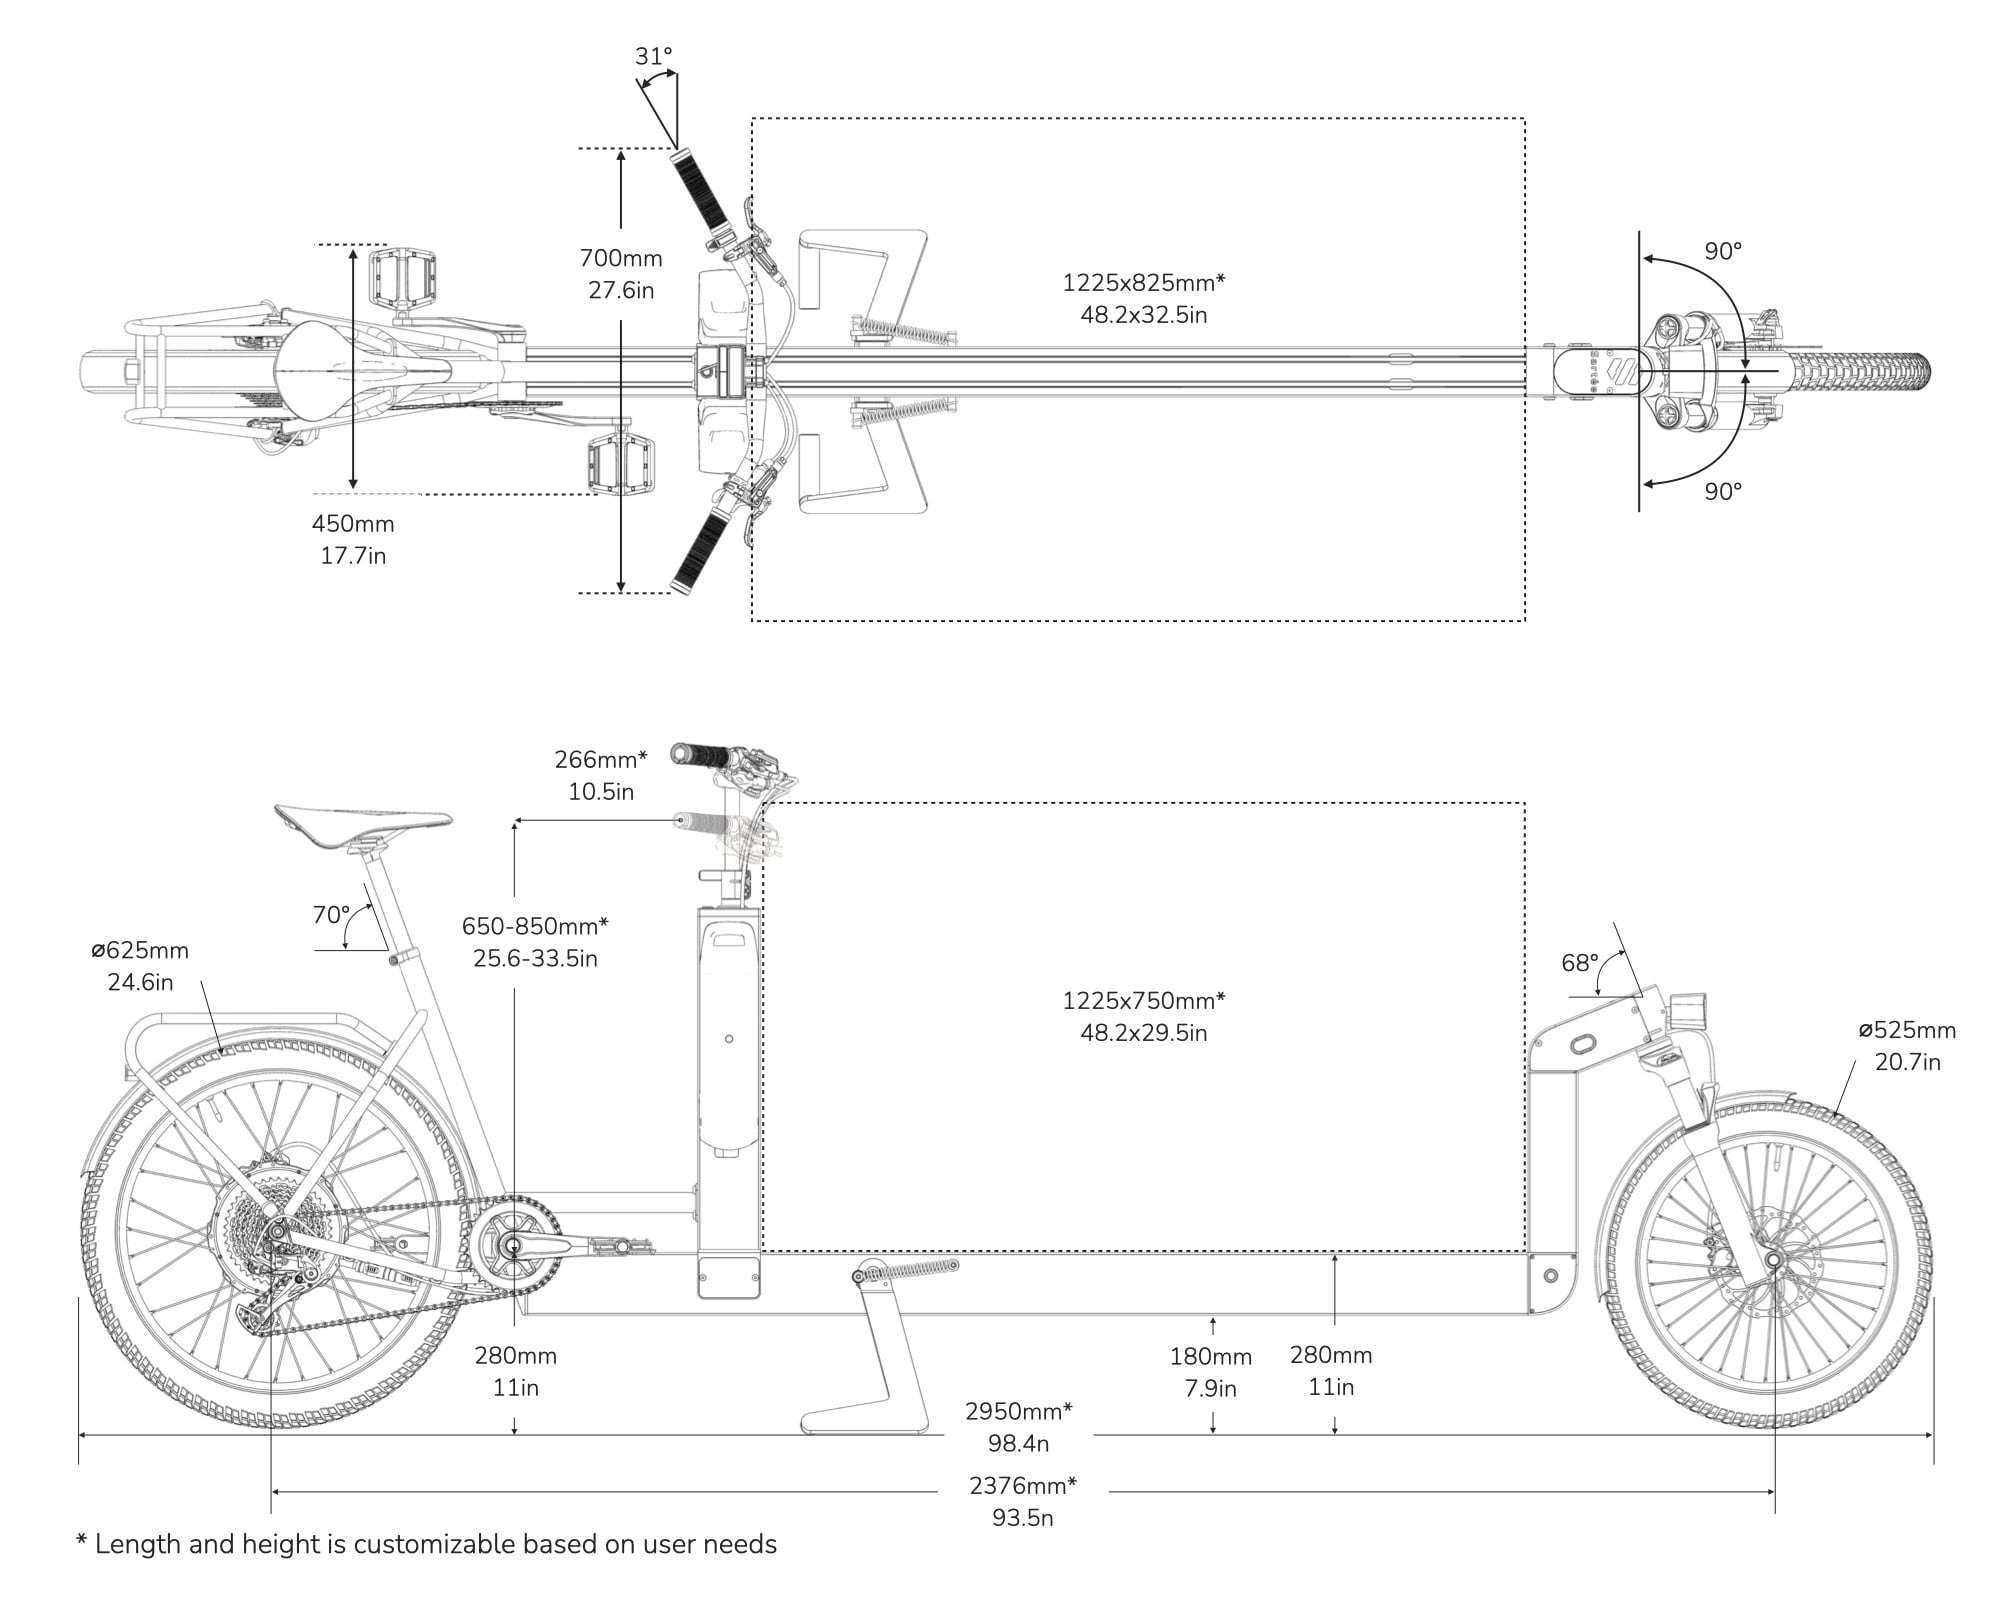 S120 Cargo bike geometry chart, side view and top view, length,width,height of bicycle